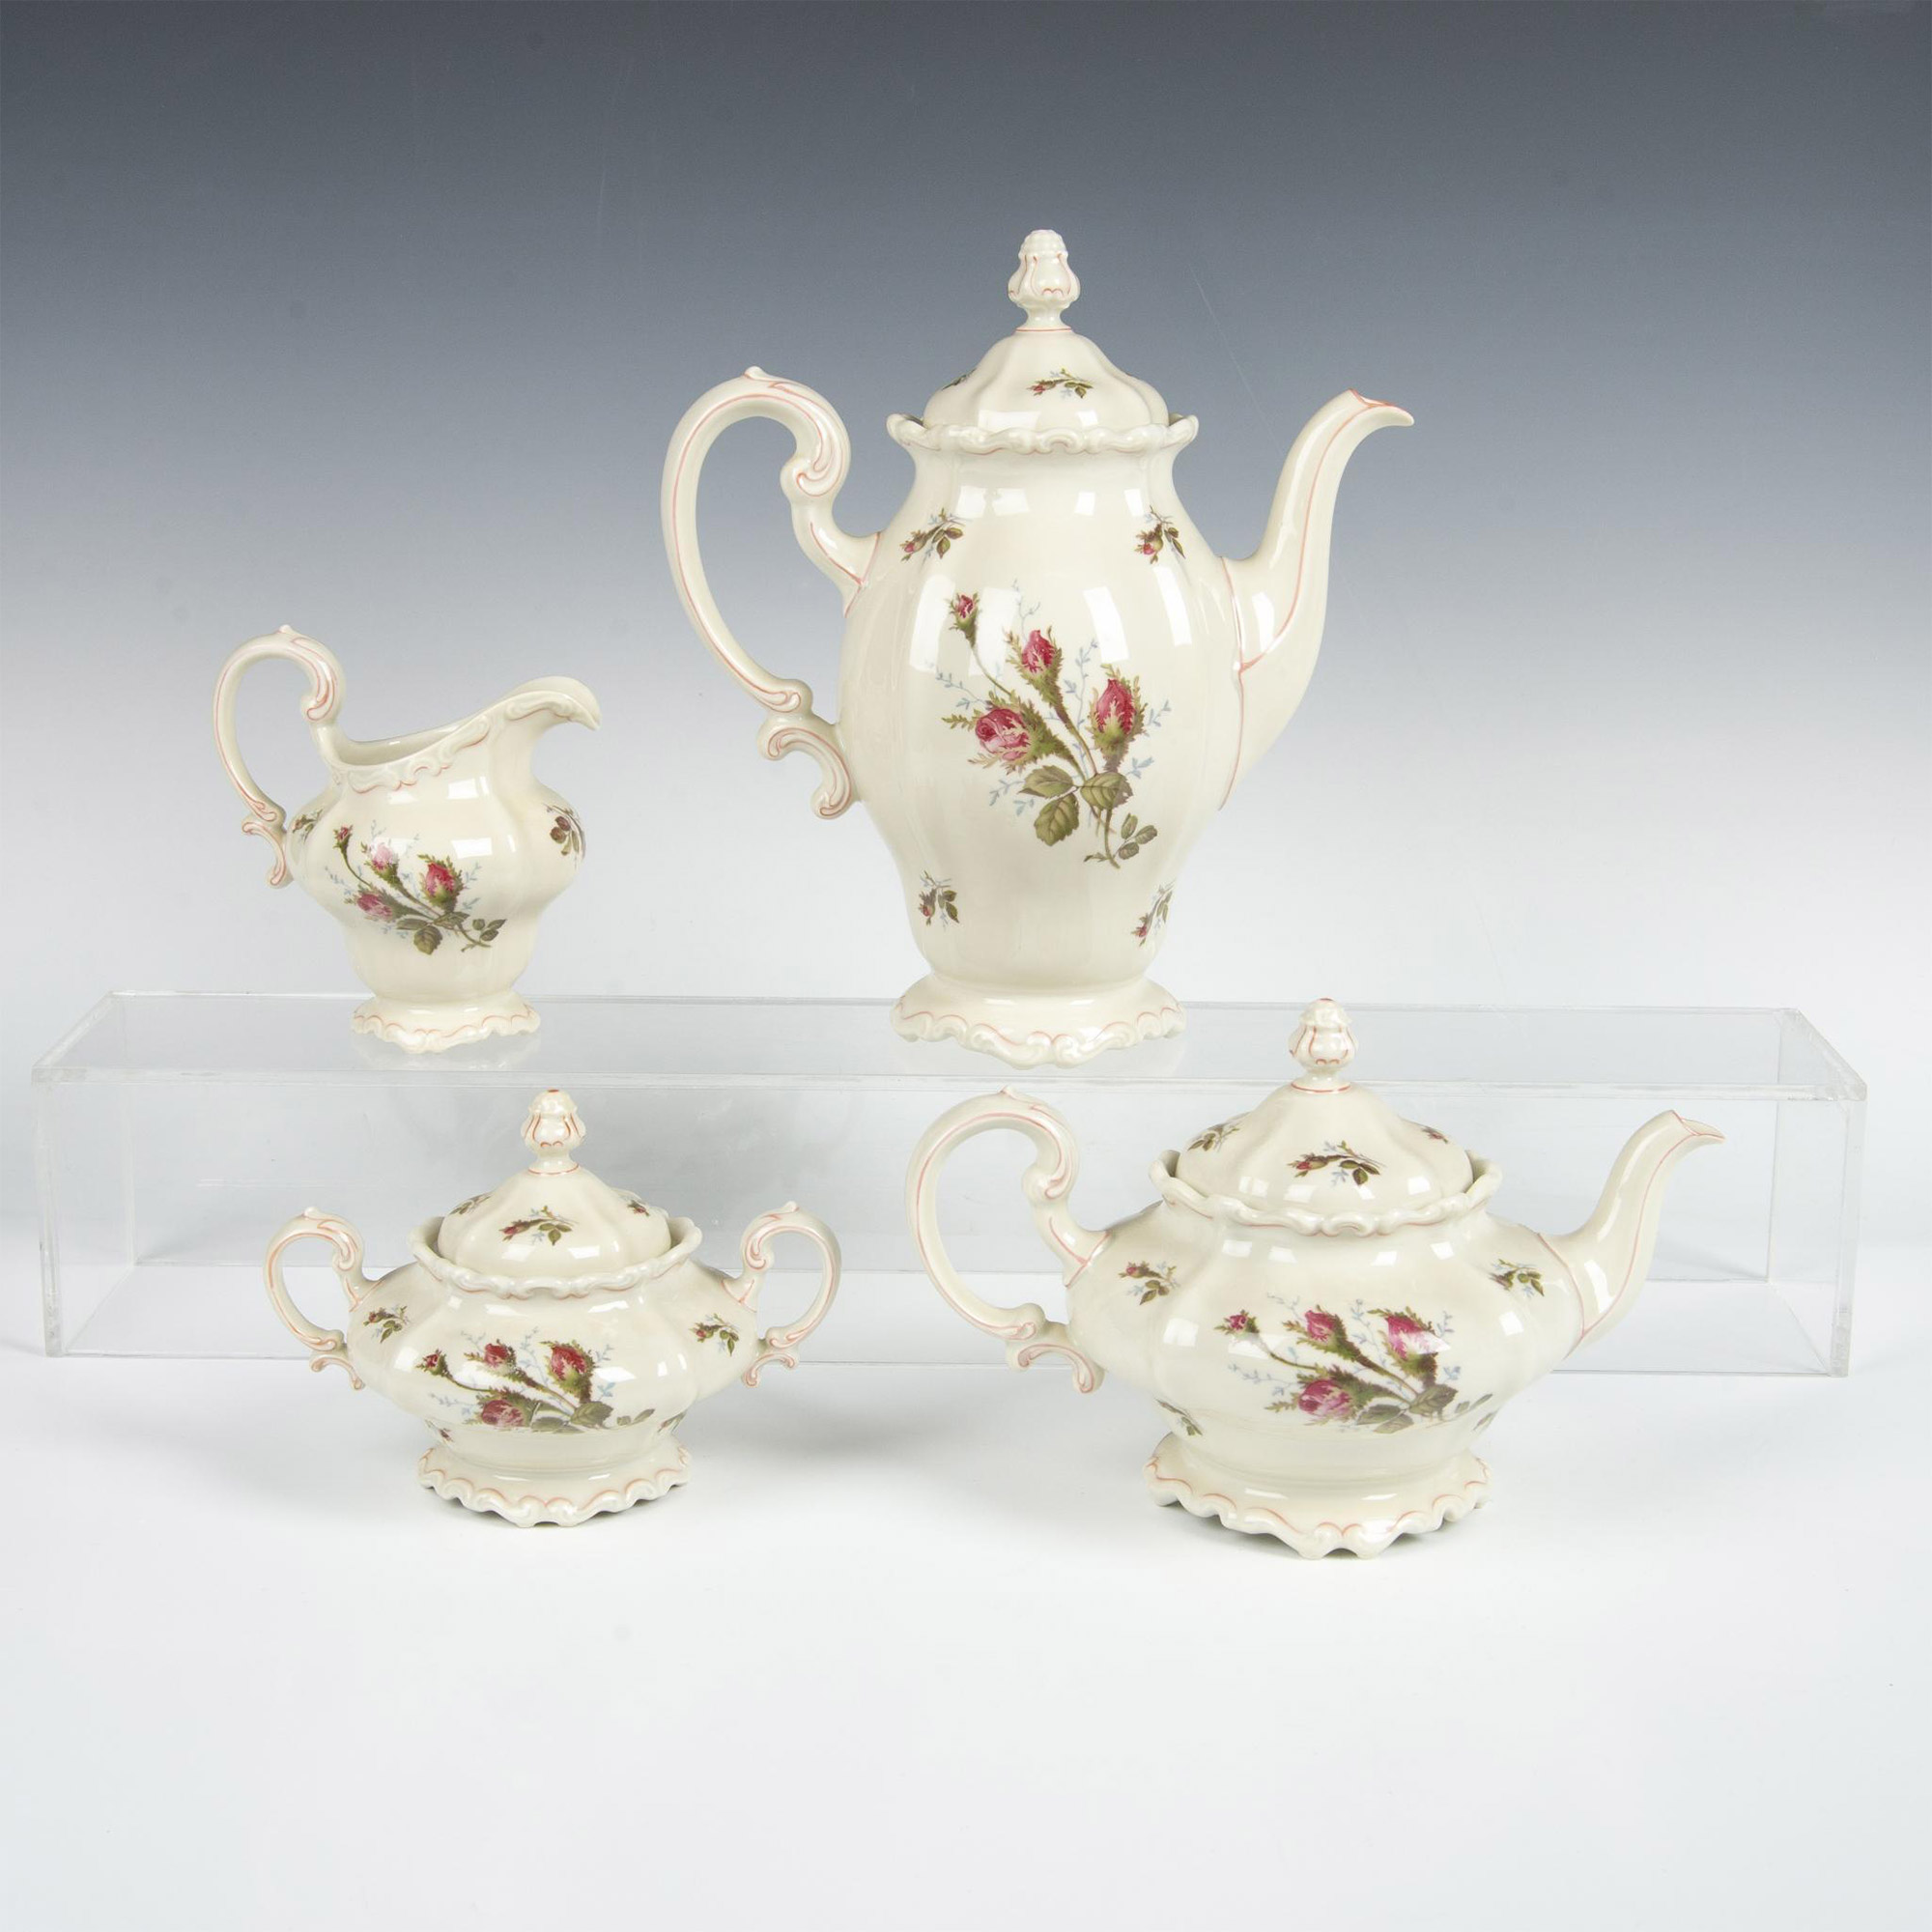 4pc Rosenthal Pompadour Moss Rose Tea and Coffee Service - Image 2 of 4